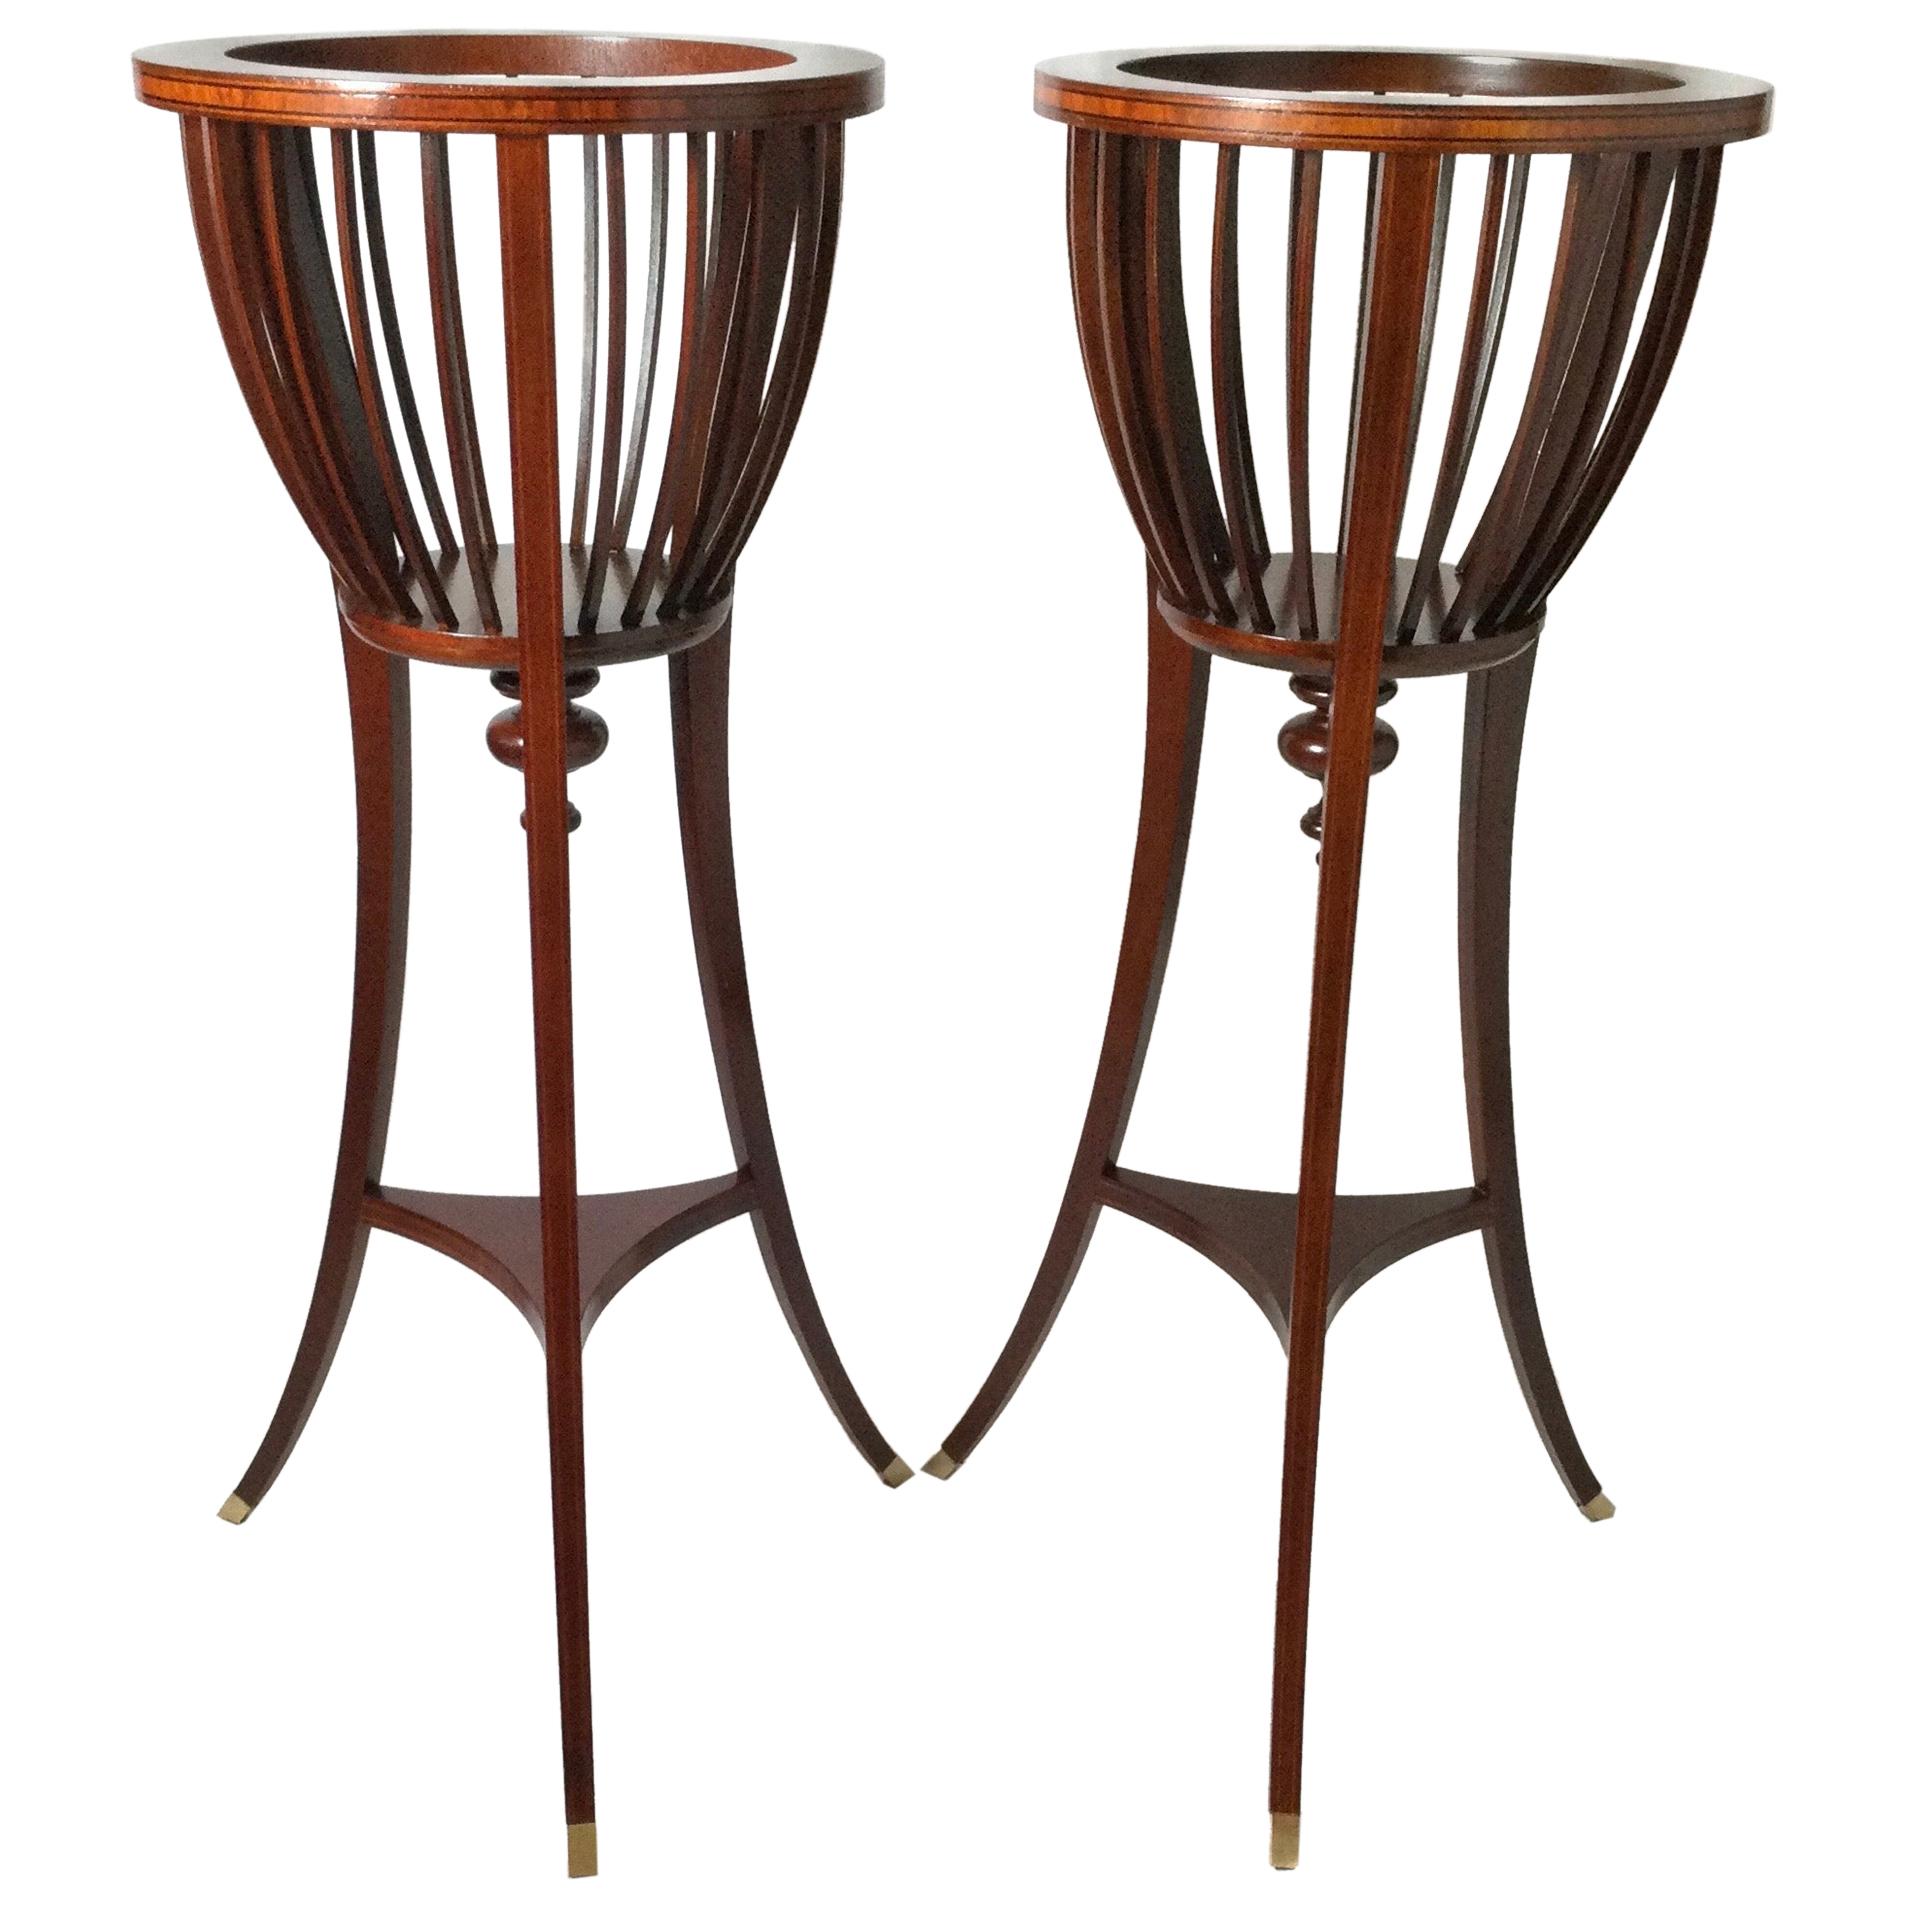 Pair of Vintage Baker Mahogany Plant Stands